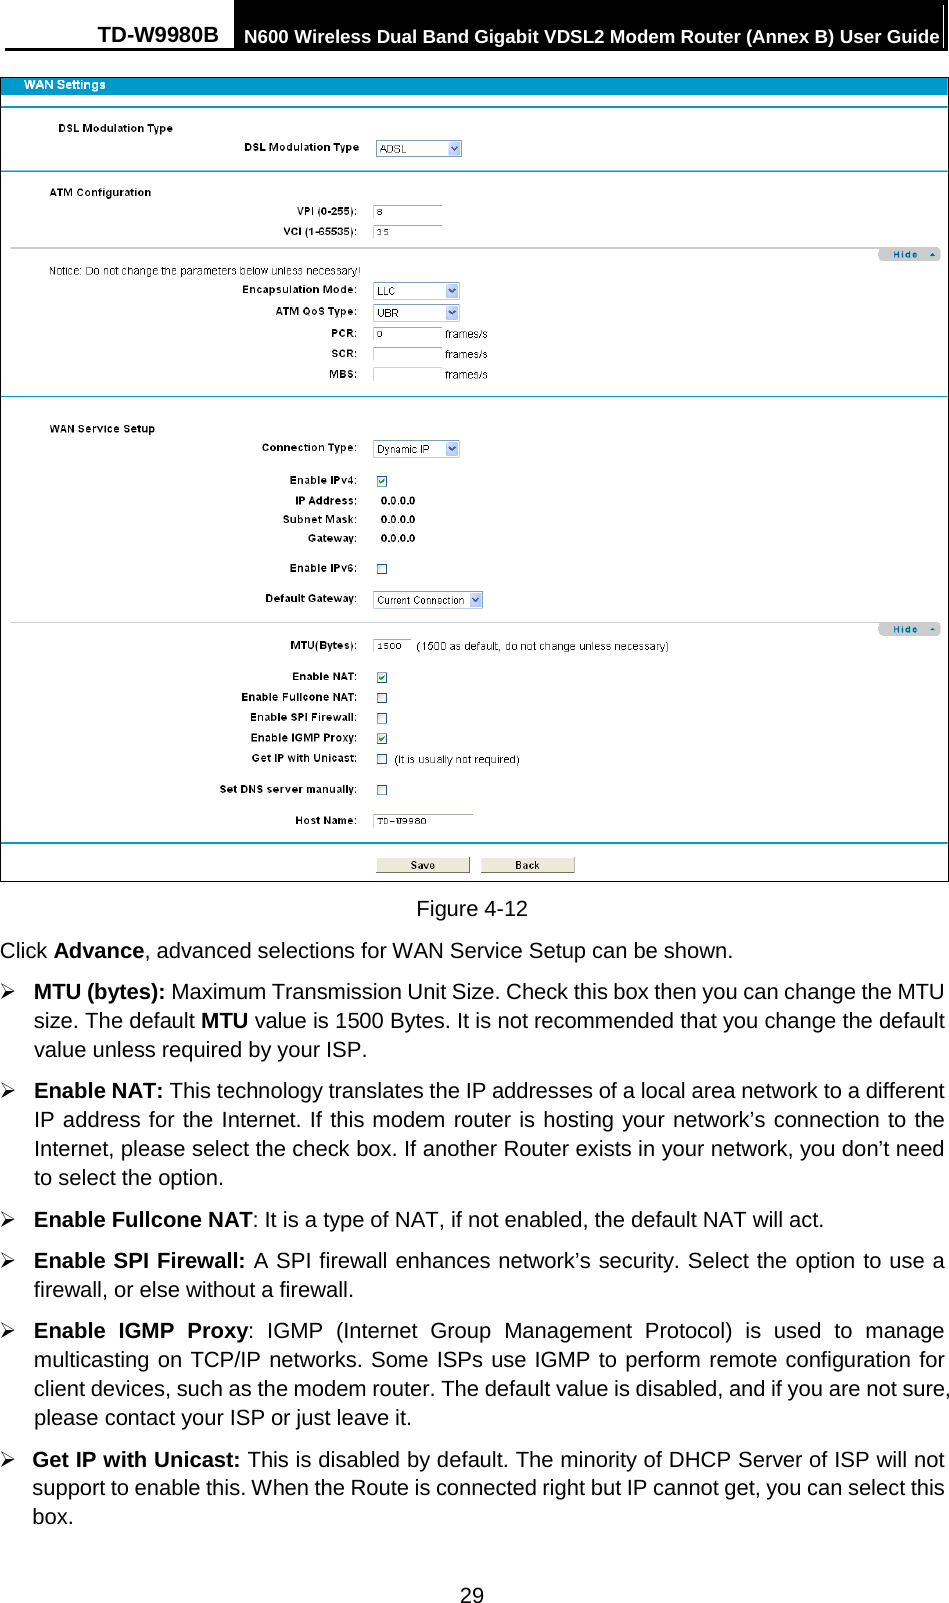 TD-W9980B N600 Wireless Dual Band Gigabit VDSL2 Modem Router (Annex B) User Guide   Figure 4-12 Click Advance, advanced selections for WAN Service Setup can be shown.  MTU (bytes): Maximum Transmission Unit Size. Check this box then you can change the MTU size. The default MTU value is 1500 Bytes. It is not recommended that you change the default value unless required by your ISP.  Enable NAT: This technology translates the IP addresses of a local area network to a different IP address for the Internet. If this modem router is hosting your network’s connection to the Internet, please select the check box. If another Router exists in your network, you don’t need to select the option.  Enable Fullcone NAT: It is a type of NAT, if not enabled, the default NAT will act.  Enable SPI Firewall: A SPI firewall enhances network’s security. Select the option to use a firewall, or else without a firewall.  Enable IGMP Proxy:  IGMP (Internet Group Management Protocol) is used to manage multicasting on TCP/IP networks. Some ISPs use IGMP to perform remote configuration for client devices, such as the modem router. The default value is disabled, and if you are not sure, please contact your ISP or just leave it.  Get IP with Unicast: This is disabled by default. The minority of DHCP Server of ISP will not support to enable this. When the Route is connected right but IP cannot get, you can select this box.   29 